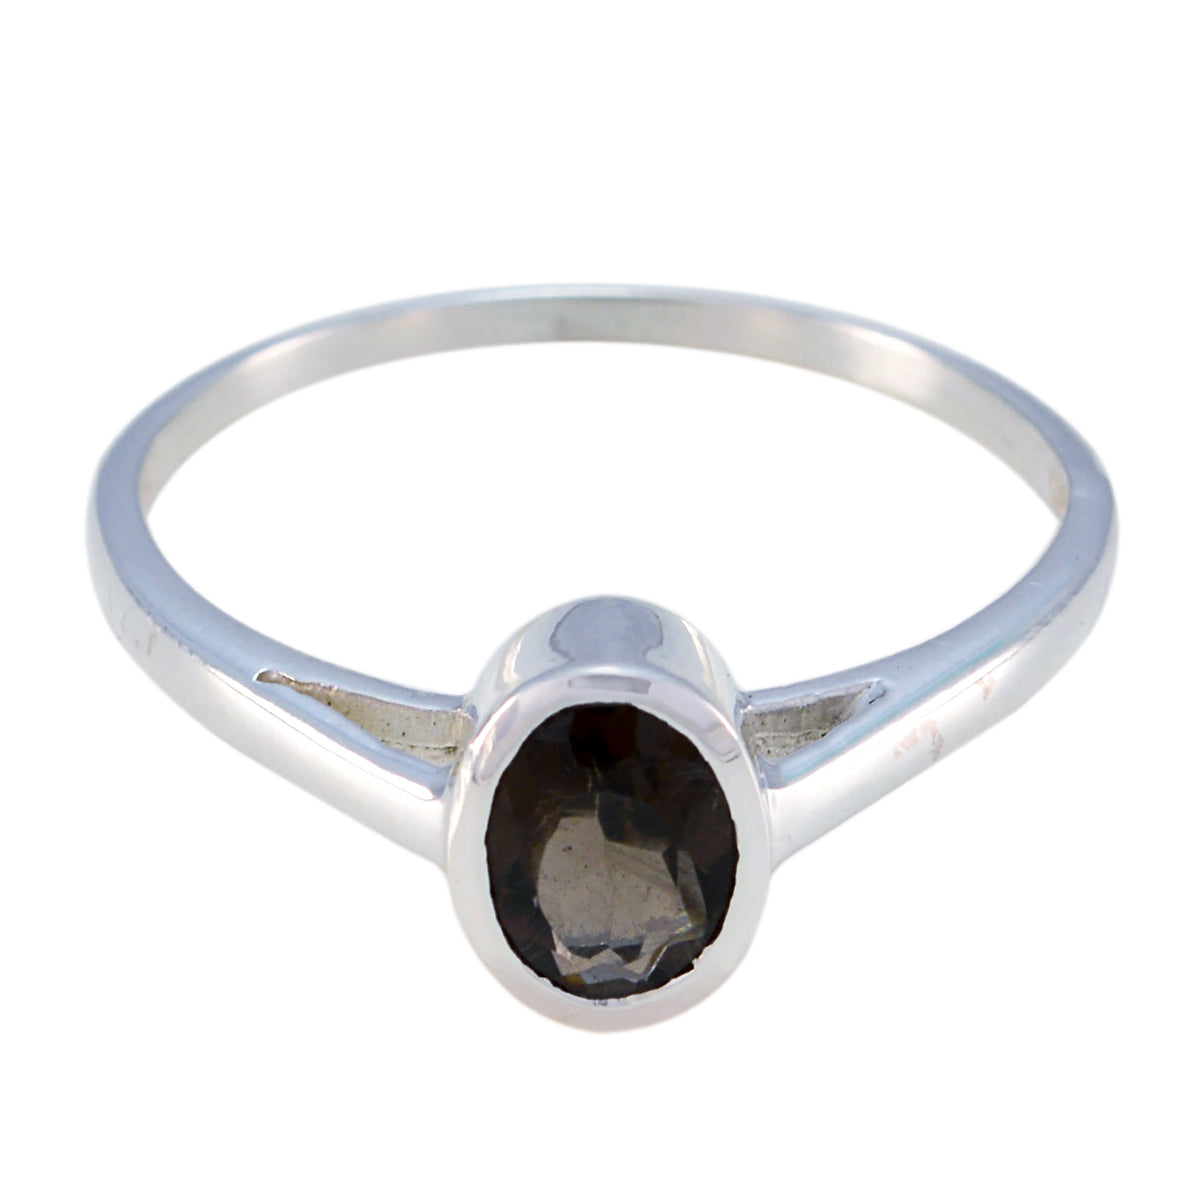 Reals Stone Smoky Quartz Sterling Silver Rings Jewelry Making Ideas